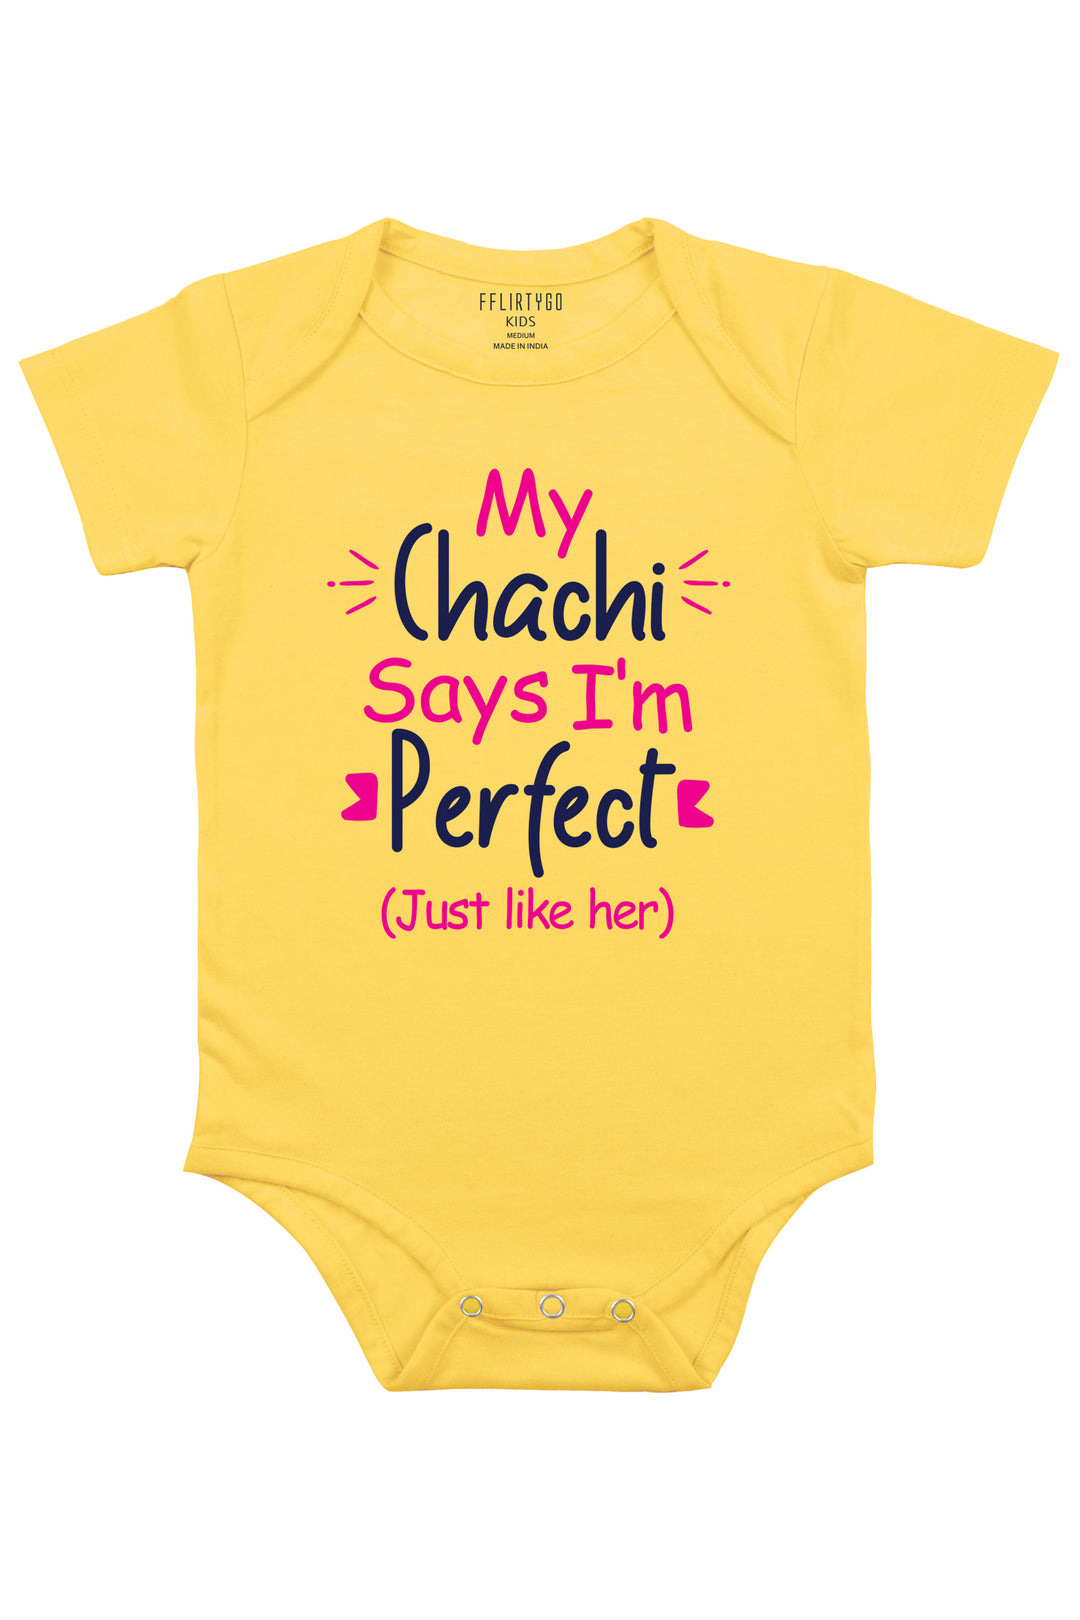 My Aunt Says I'm Perfect (Just Like Her) Baby Romper | Onesies